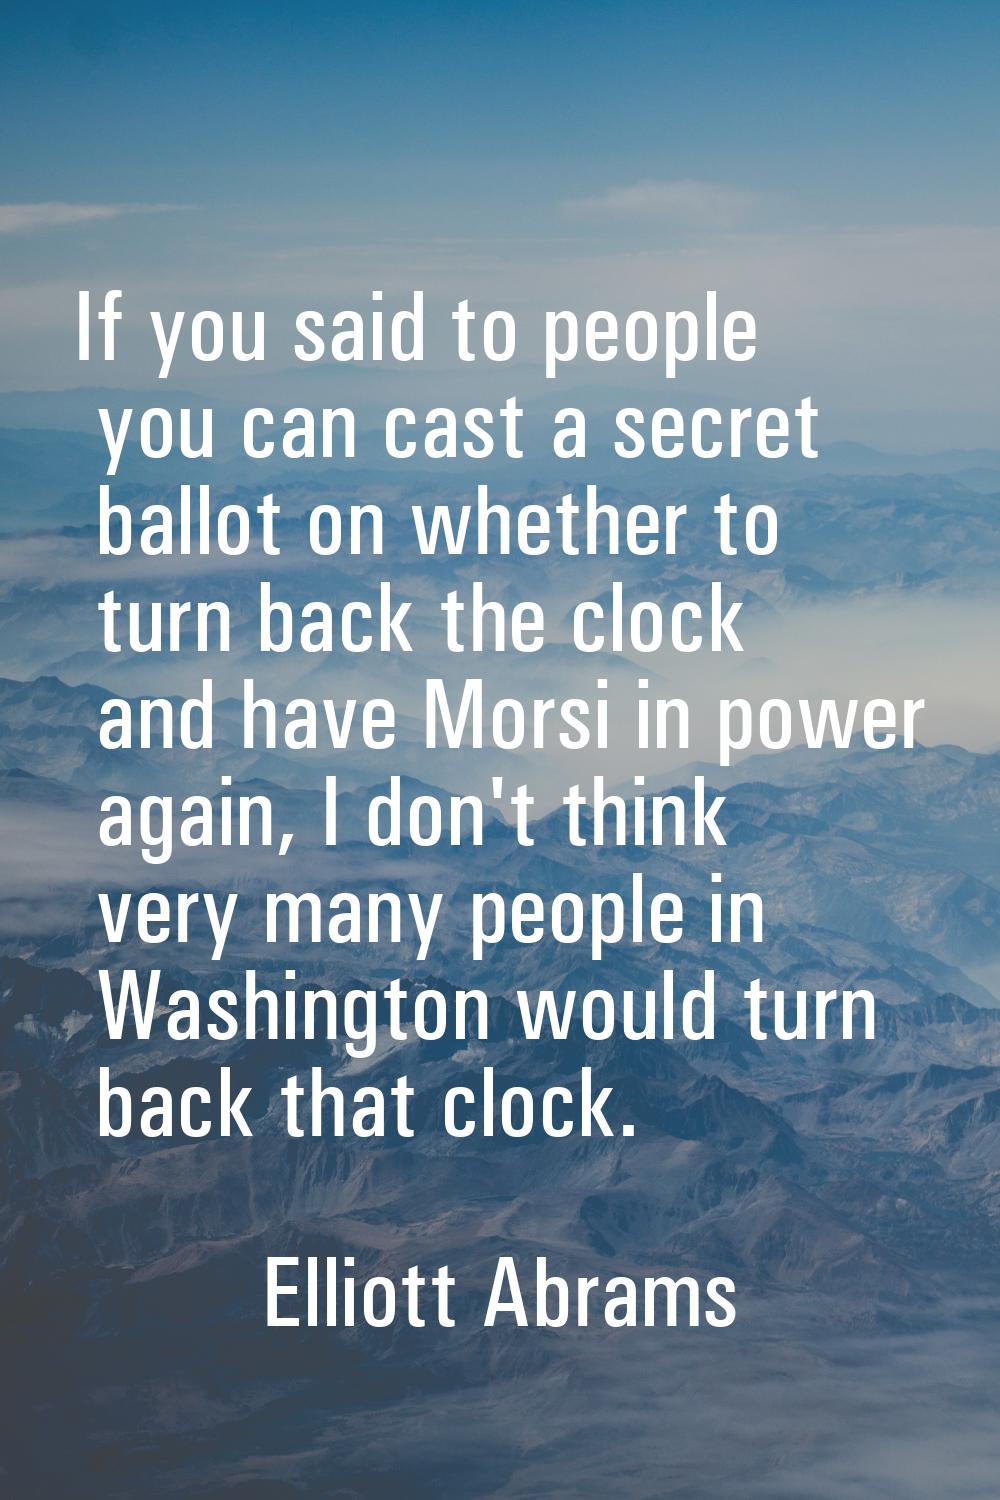 If you said to people you can cast a secret ballot on whether to turn back the clock and have Morsi